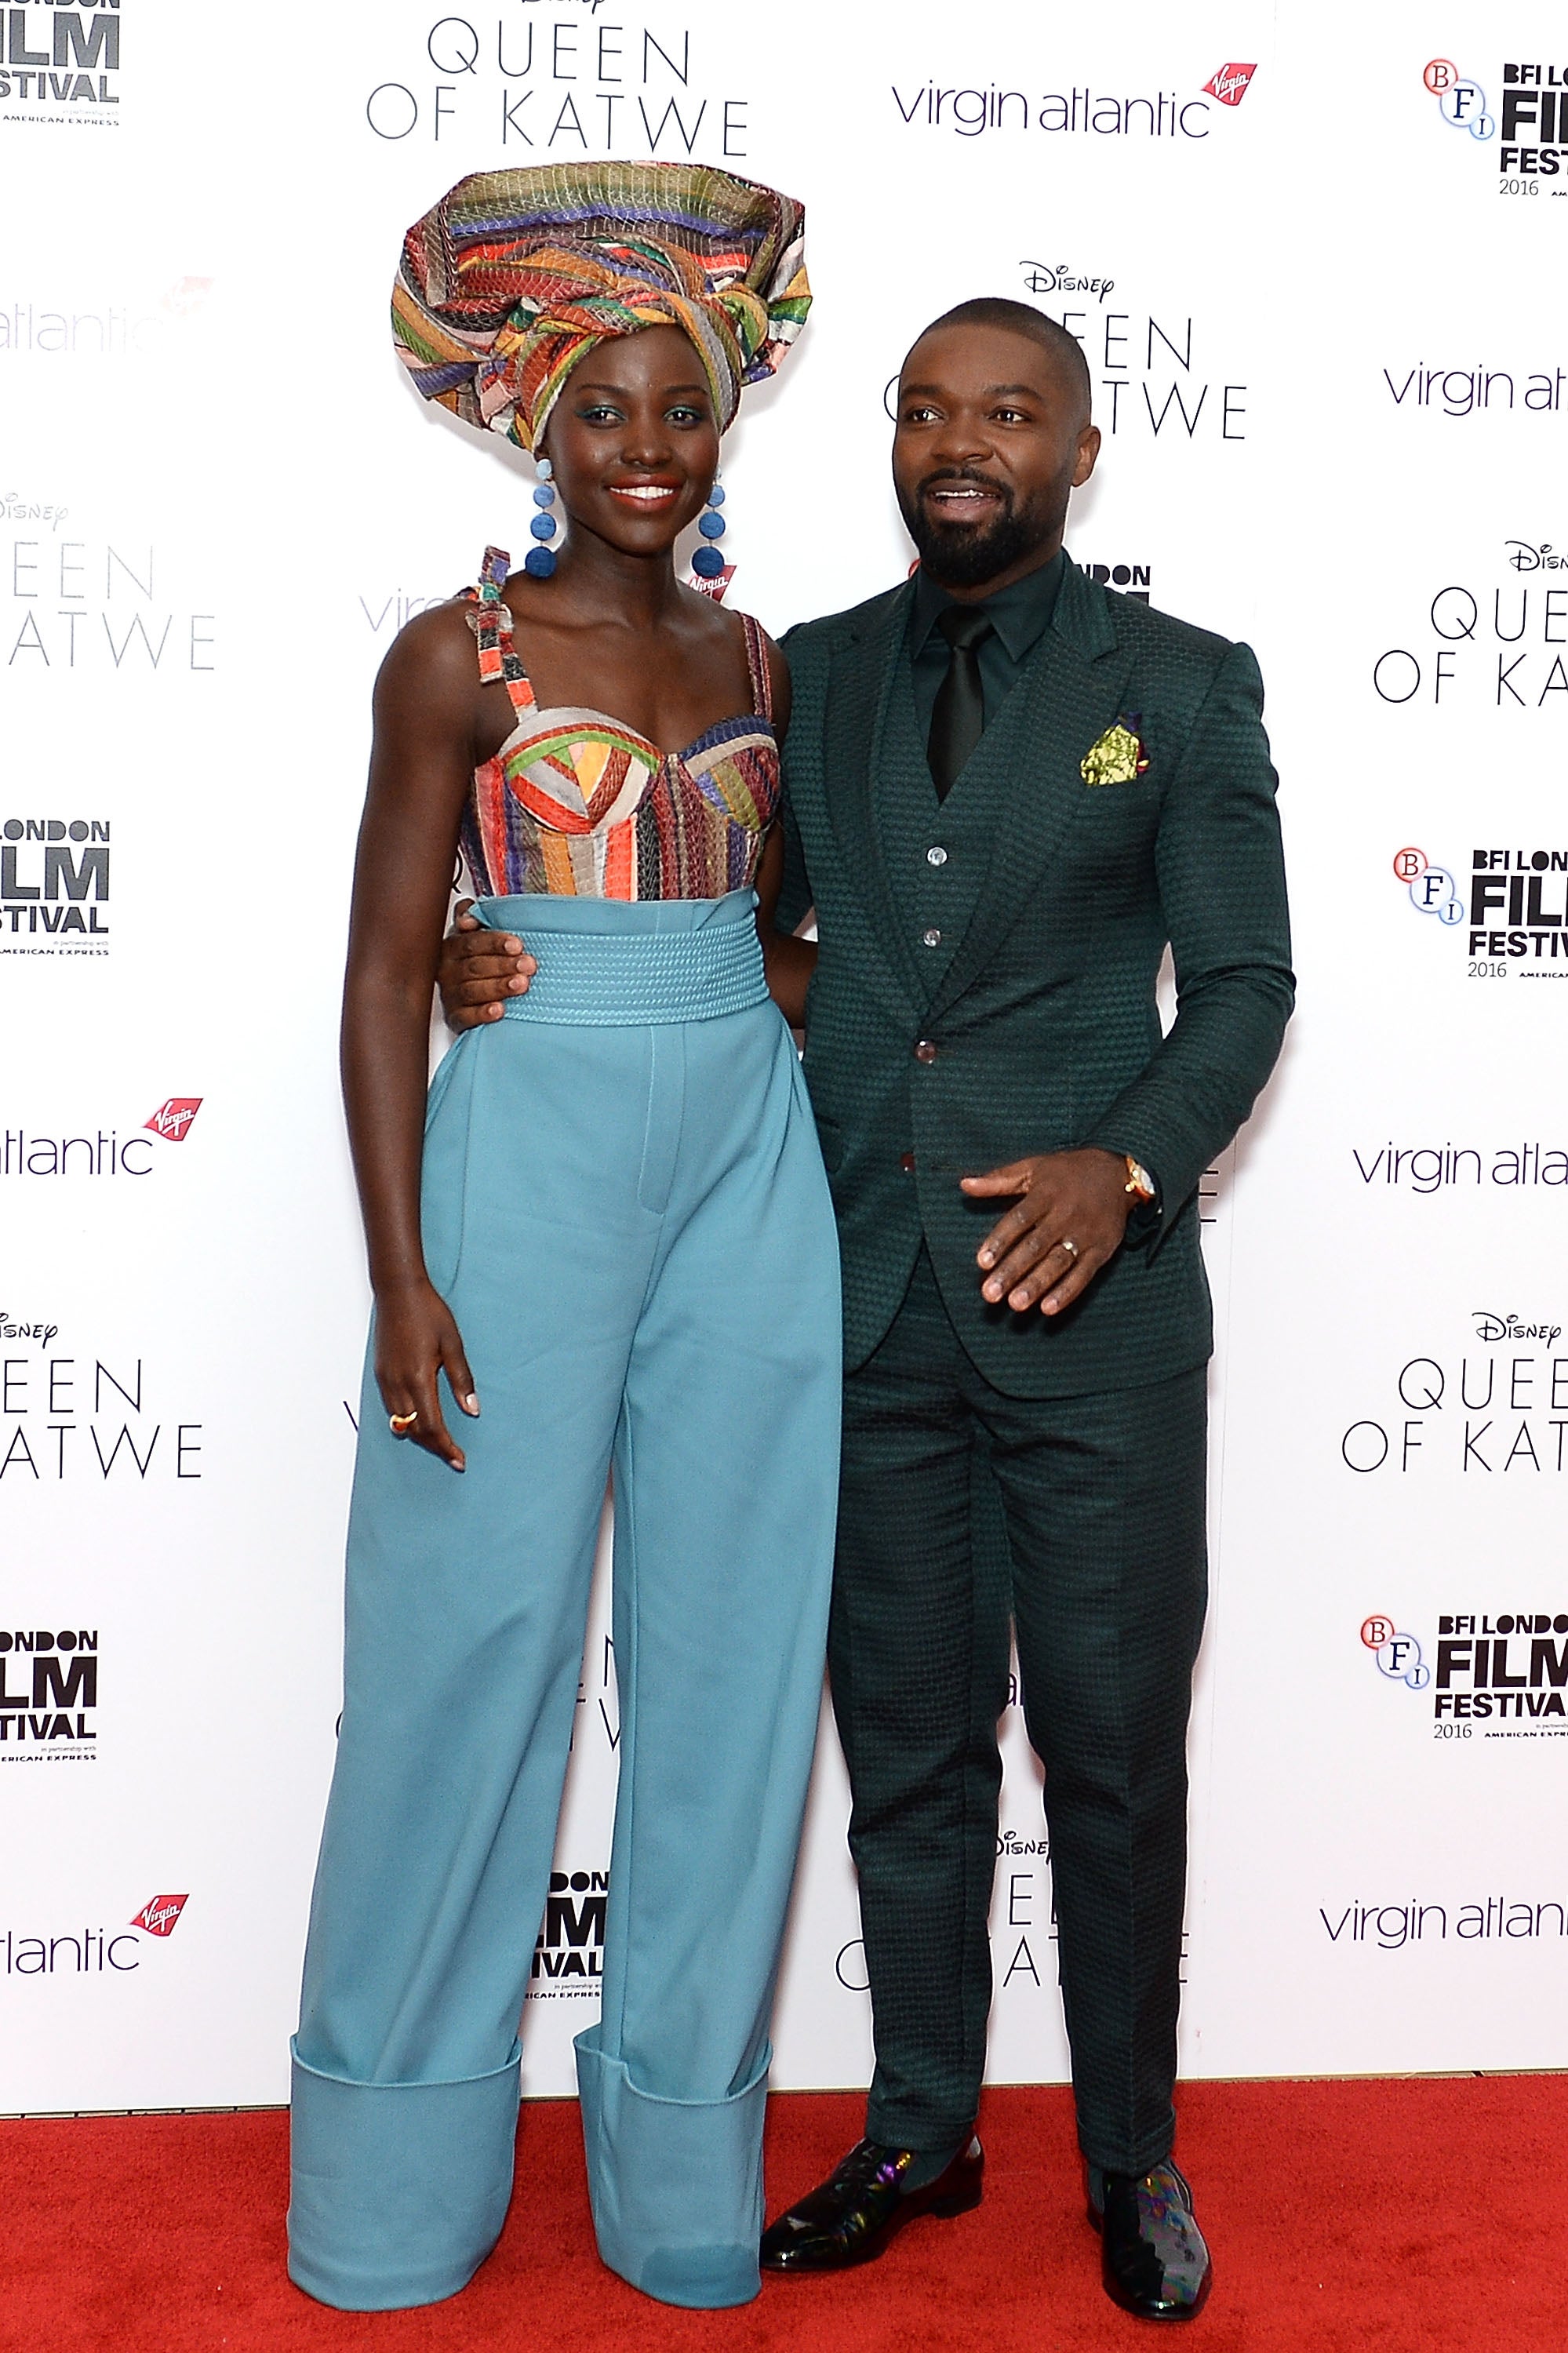 Celebs Celebrate 'Queen of Katwe' at the BFI London Film Festival
